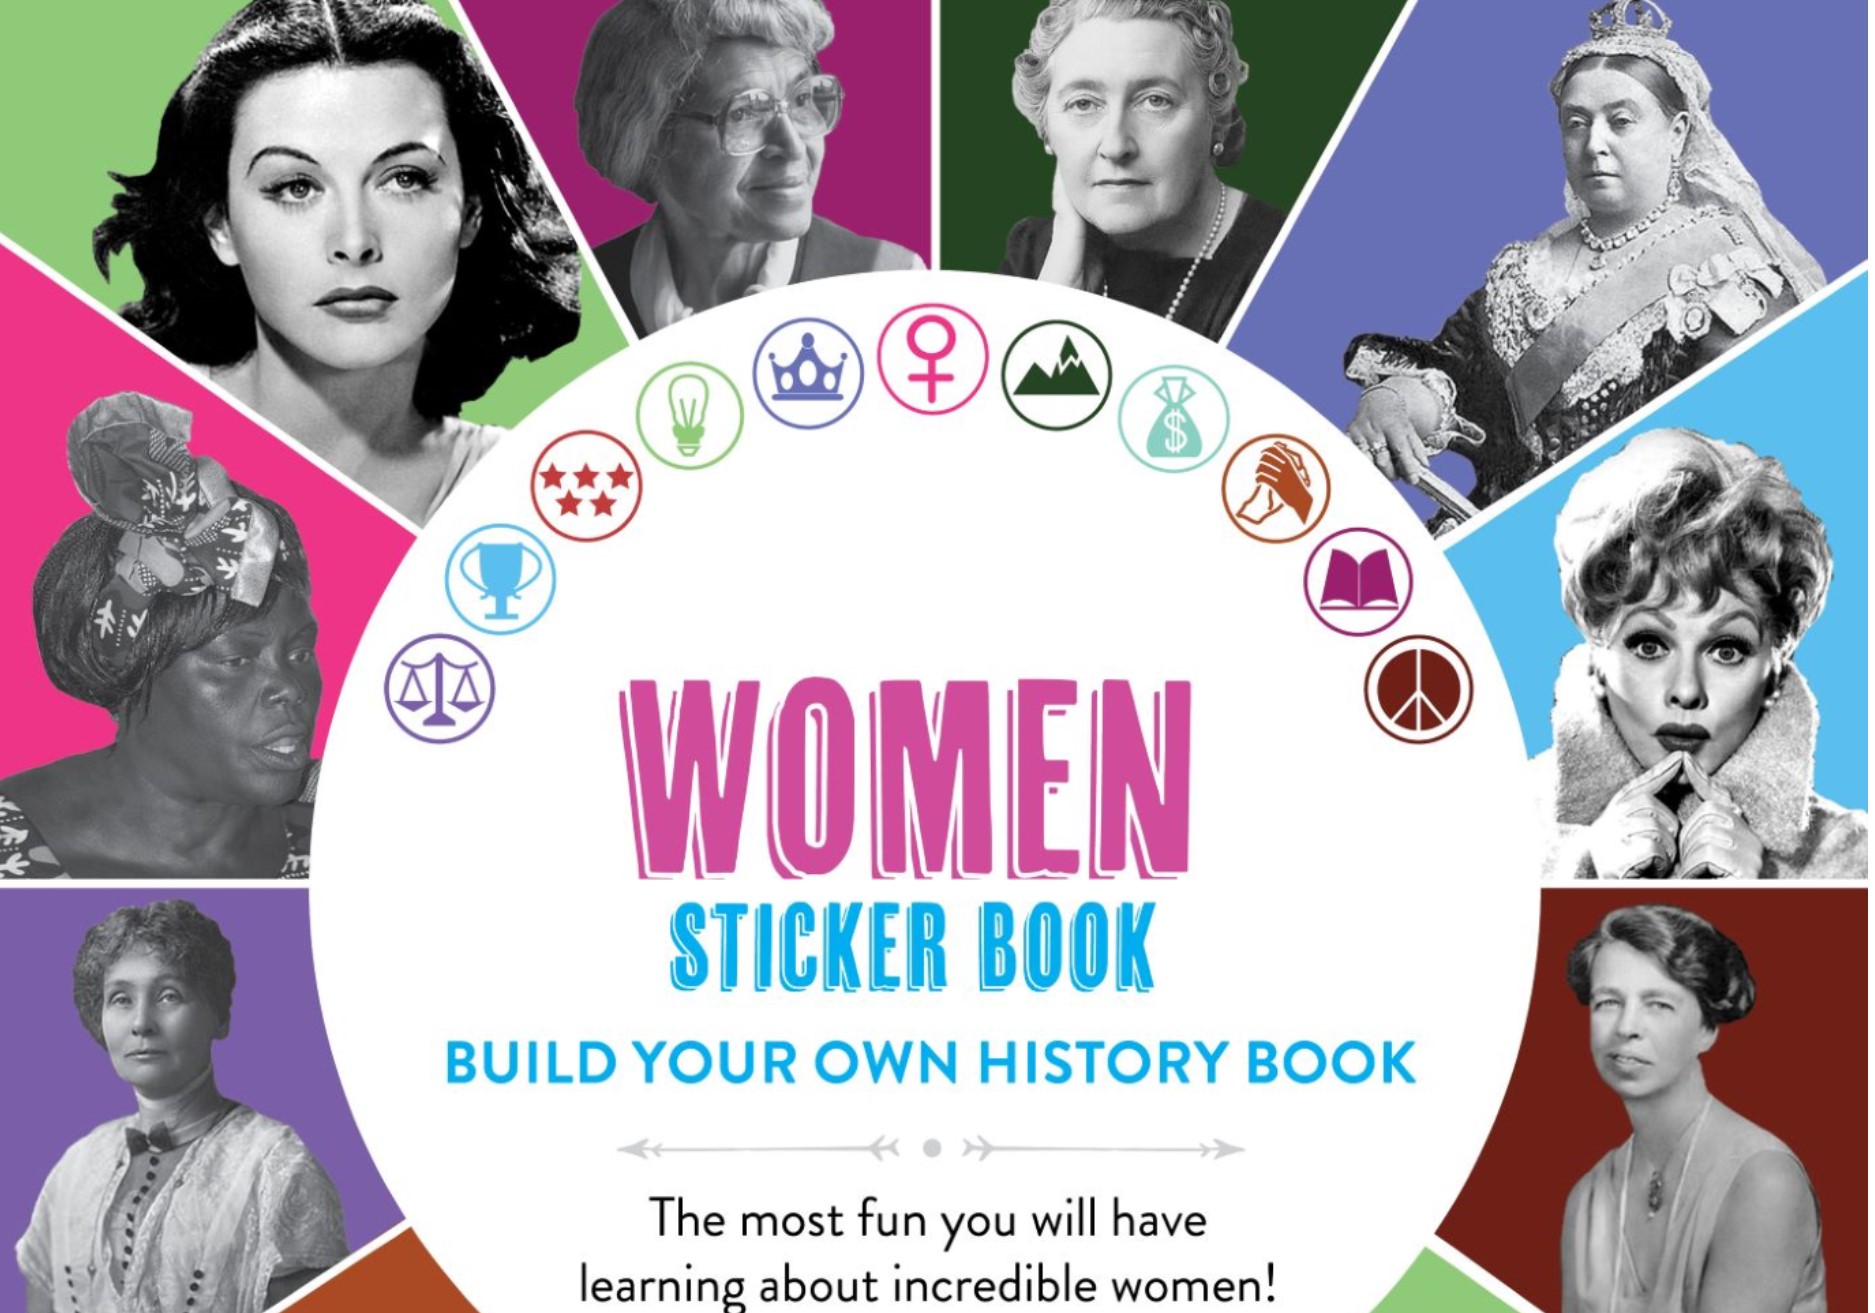 Build Your Own Women’s History Sticker Book